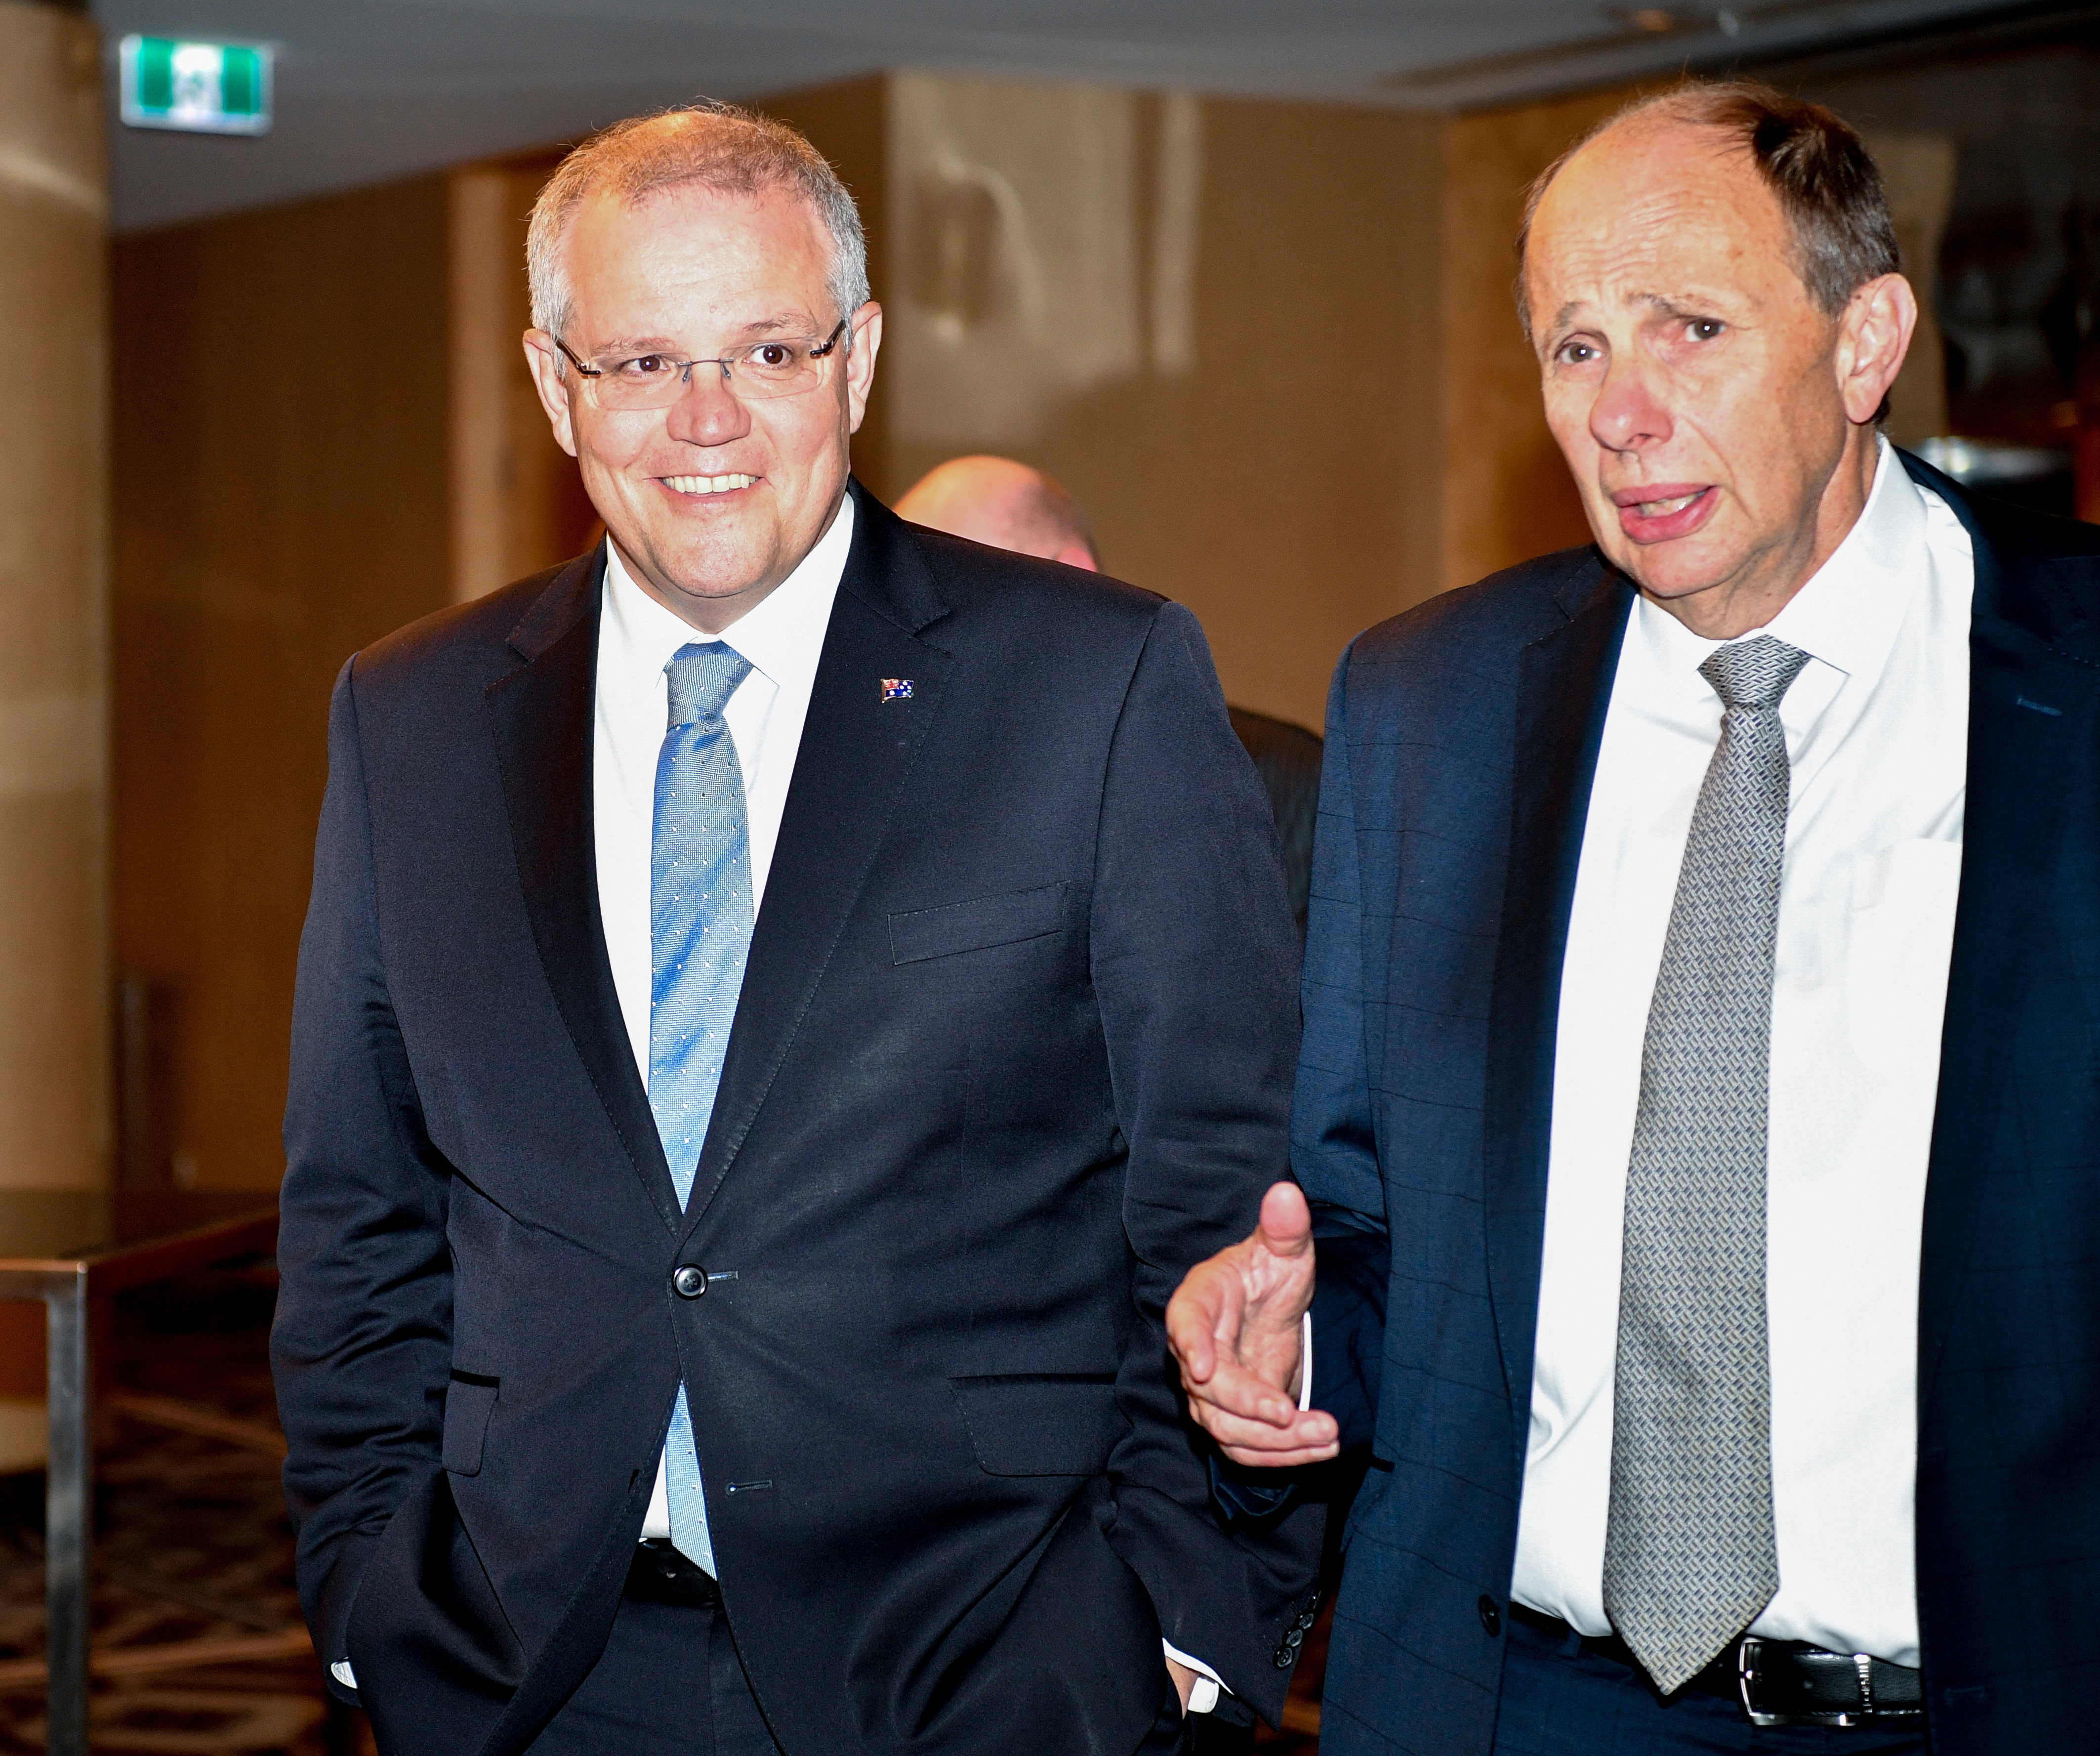 Australian Prime Minister Scott Morrison is seen with Grant King, then president of the Business Council of Australia, at a 2018 BCA dinner in Sydney.